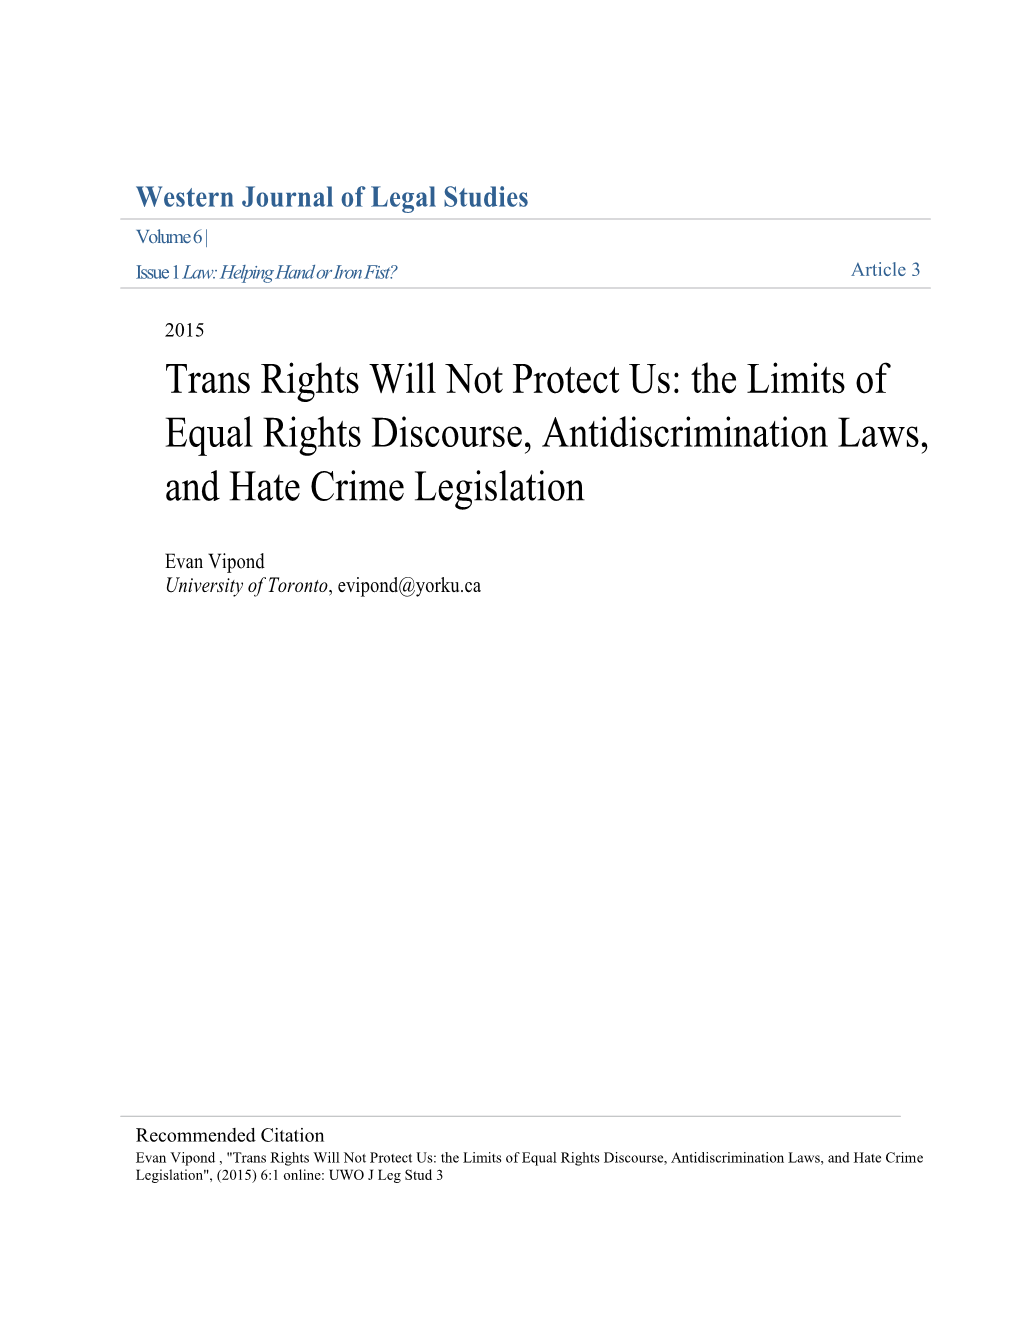 Trans Rights Will Not Protect Us: the Limits of Equal Rights Discourse, Antidiscrimination Laws, and Hate Crime Legislation